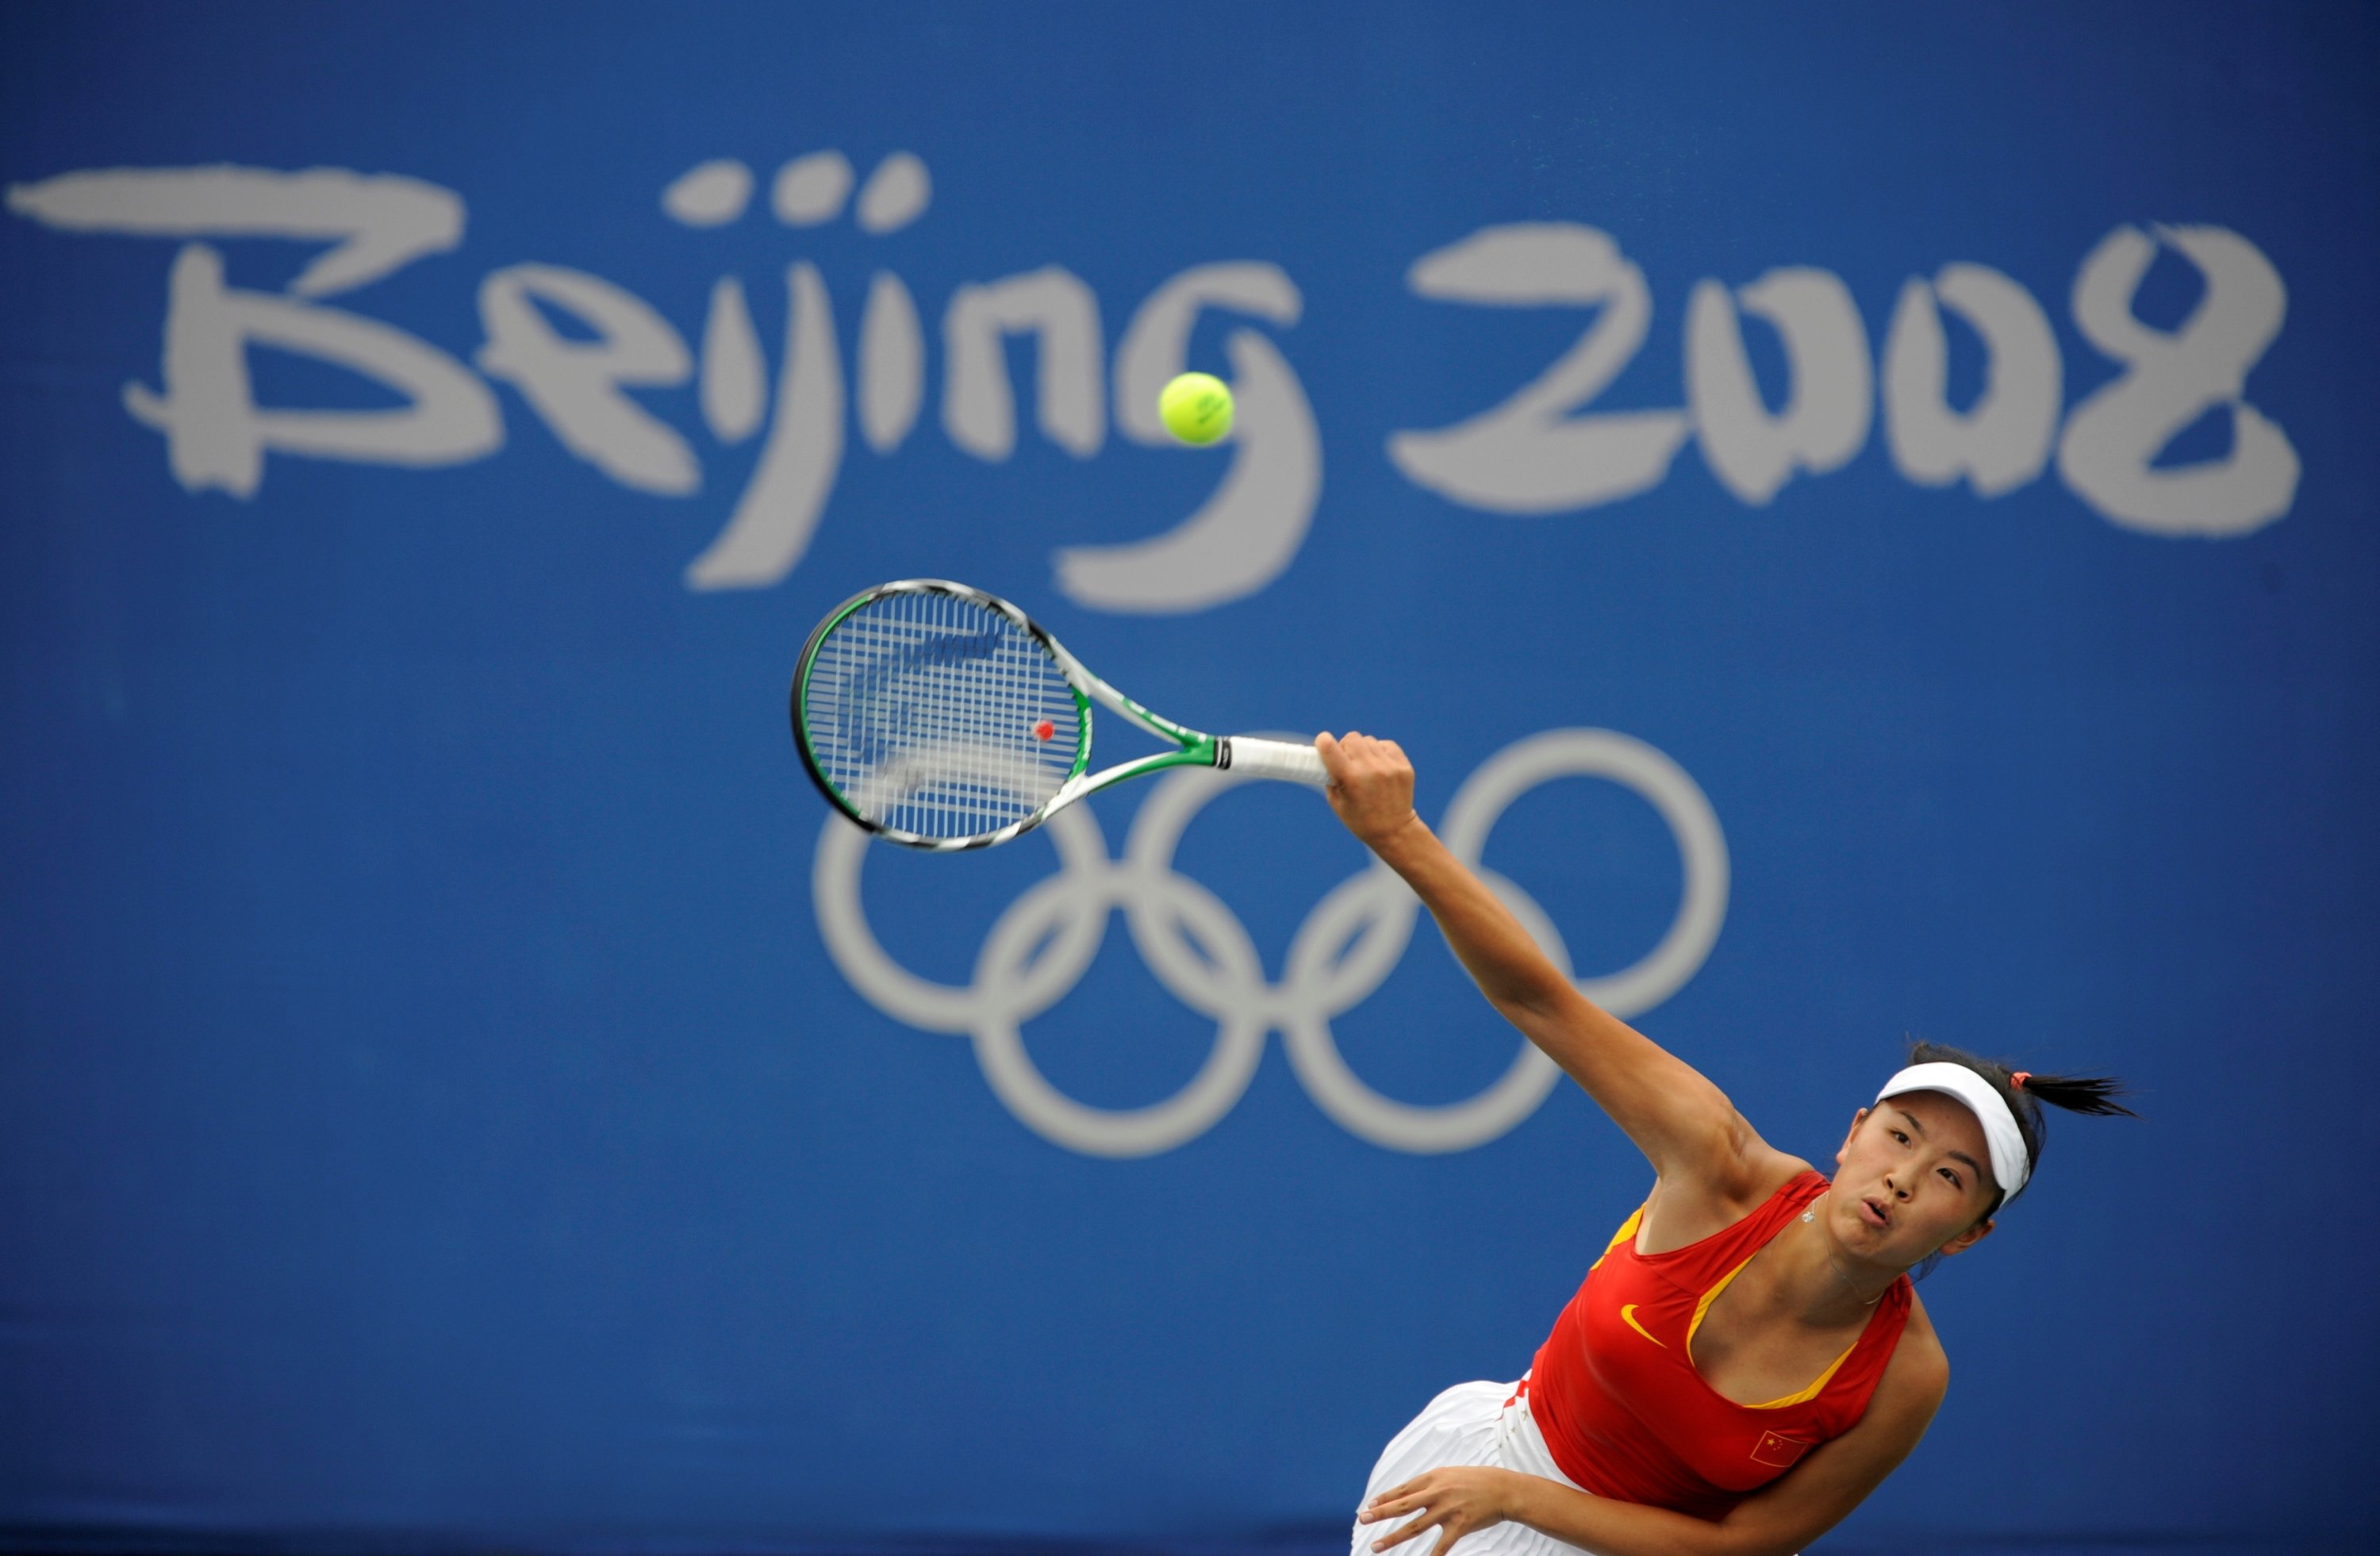 Belofte Mitt Iets WTA move to suspend China events over peng backed by tennis stars | Daily  Sabah